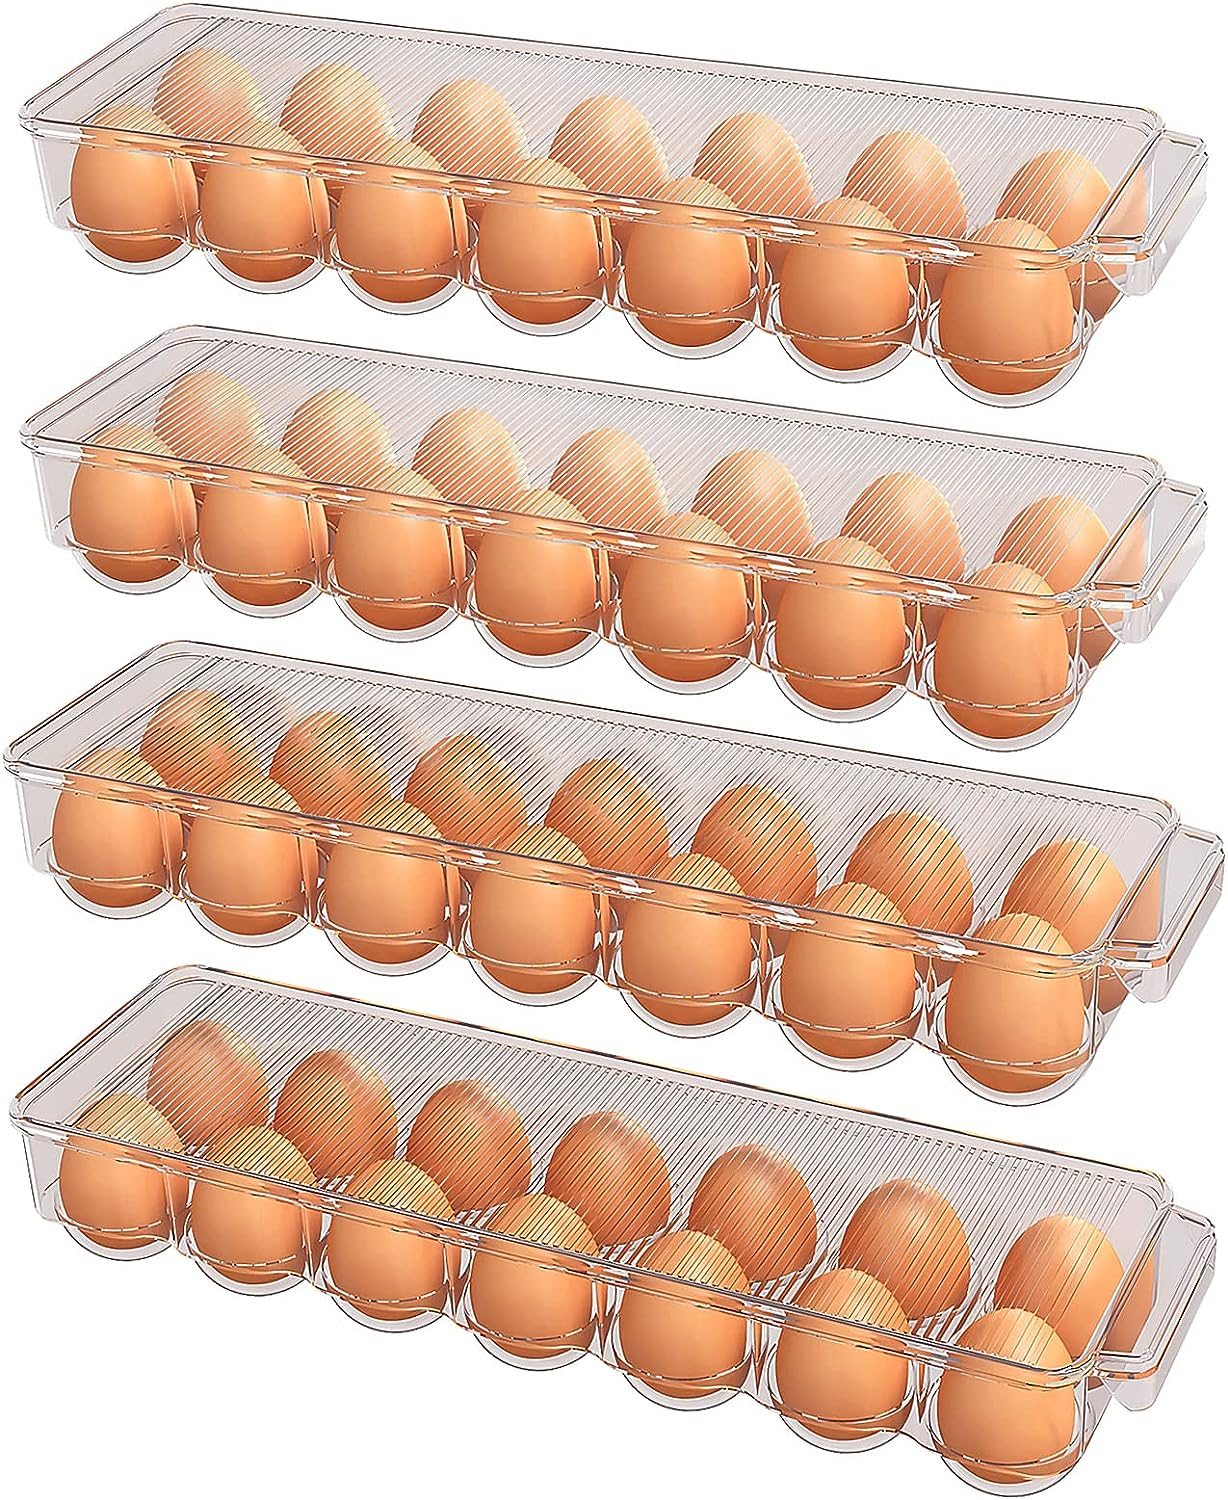 Egg Container For Refrigerator 14 Egg Container With Lid Handle Egg Holder Pack of 1 Fast Forward